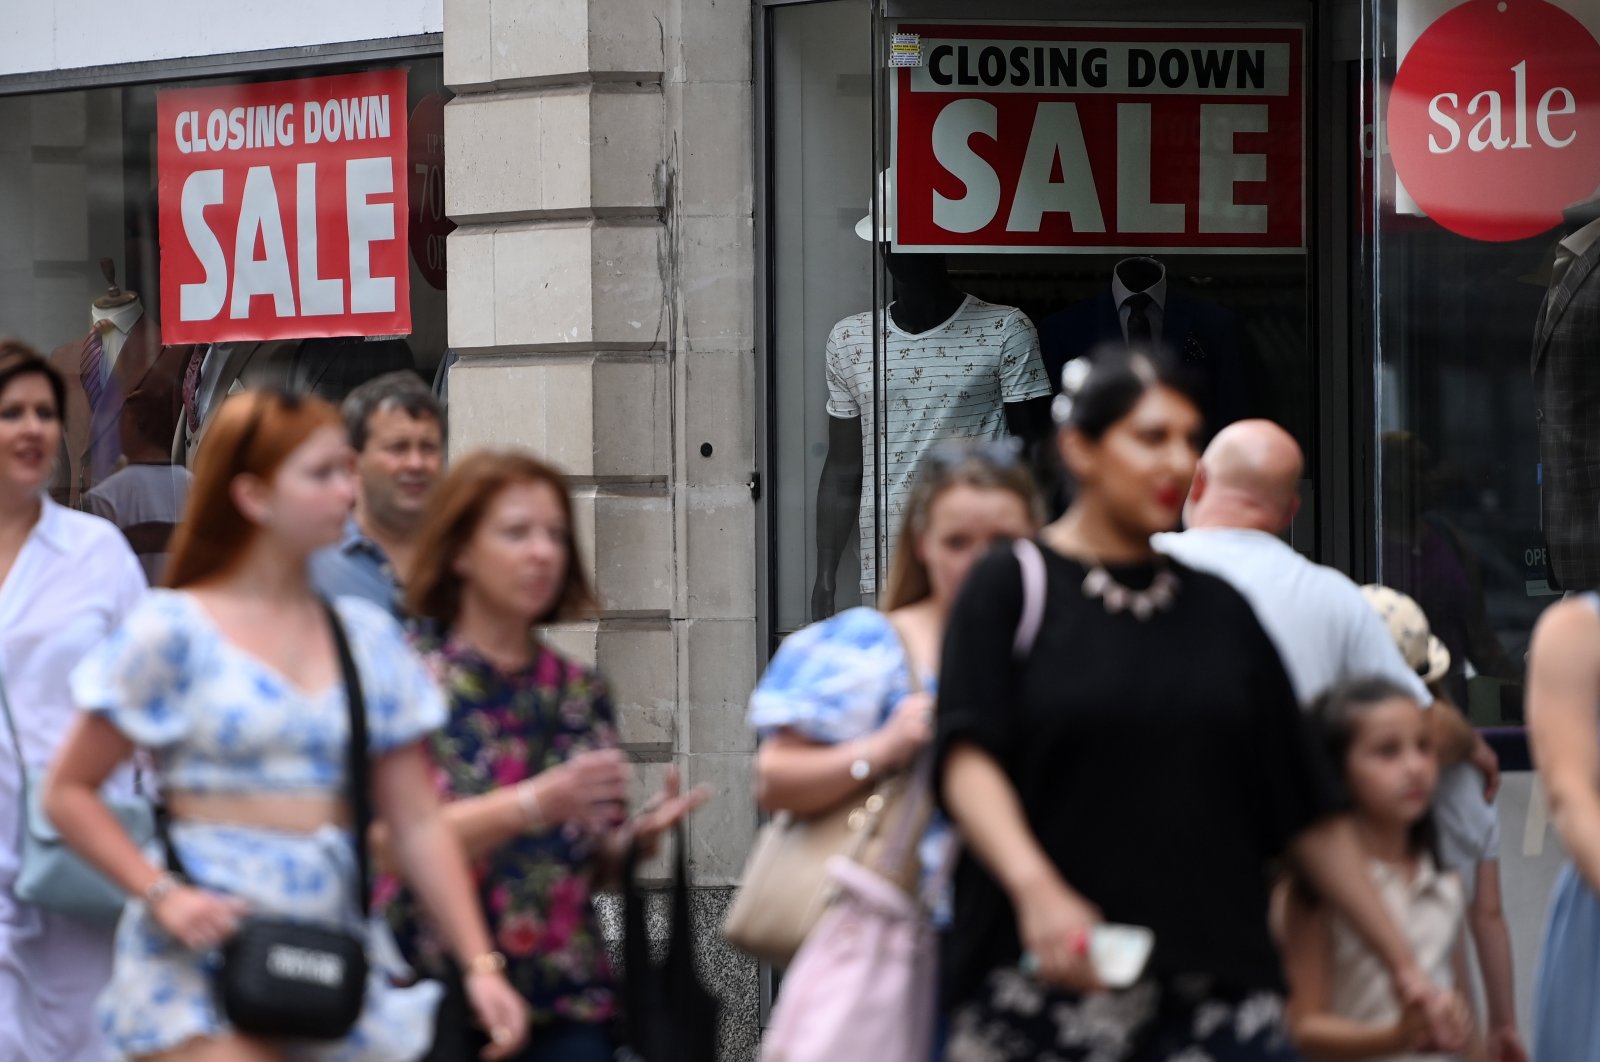 Pedestrians pass a closing down sale at a store in central London, Britain, Aug. 4, 2022. (EPA Photo)